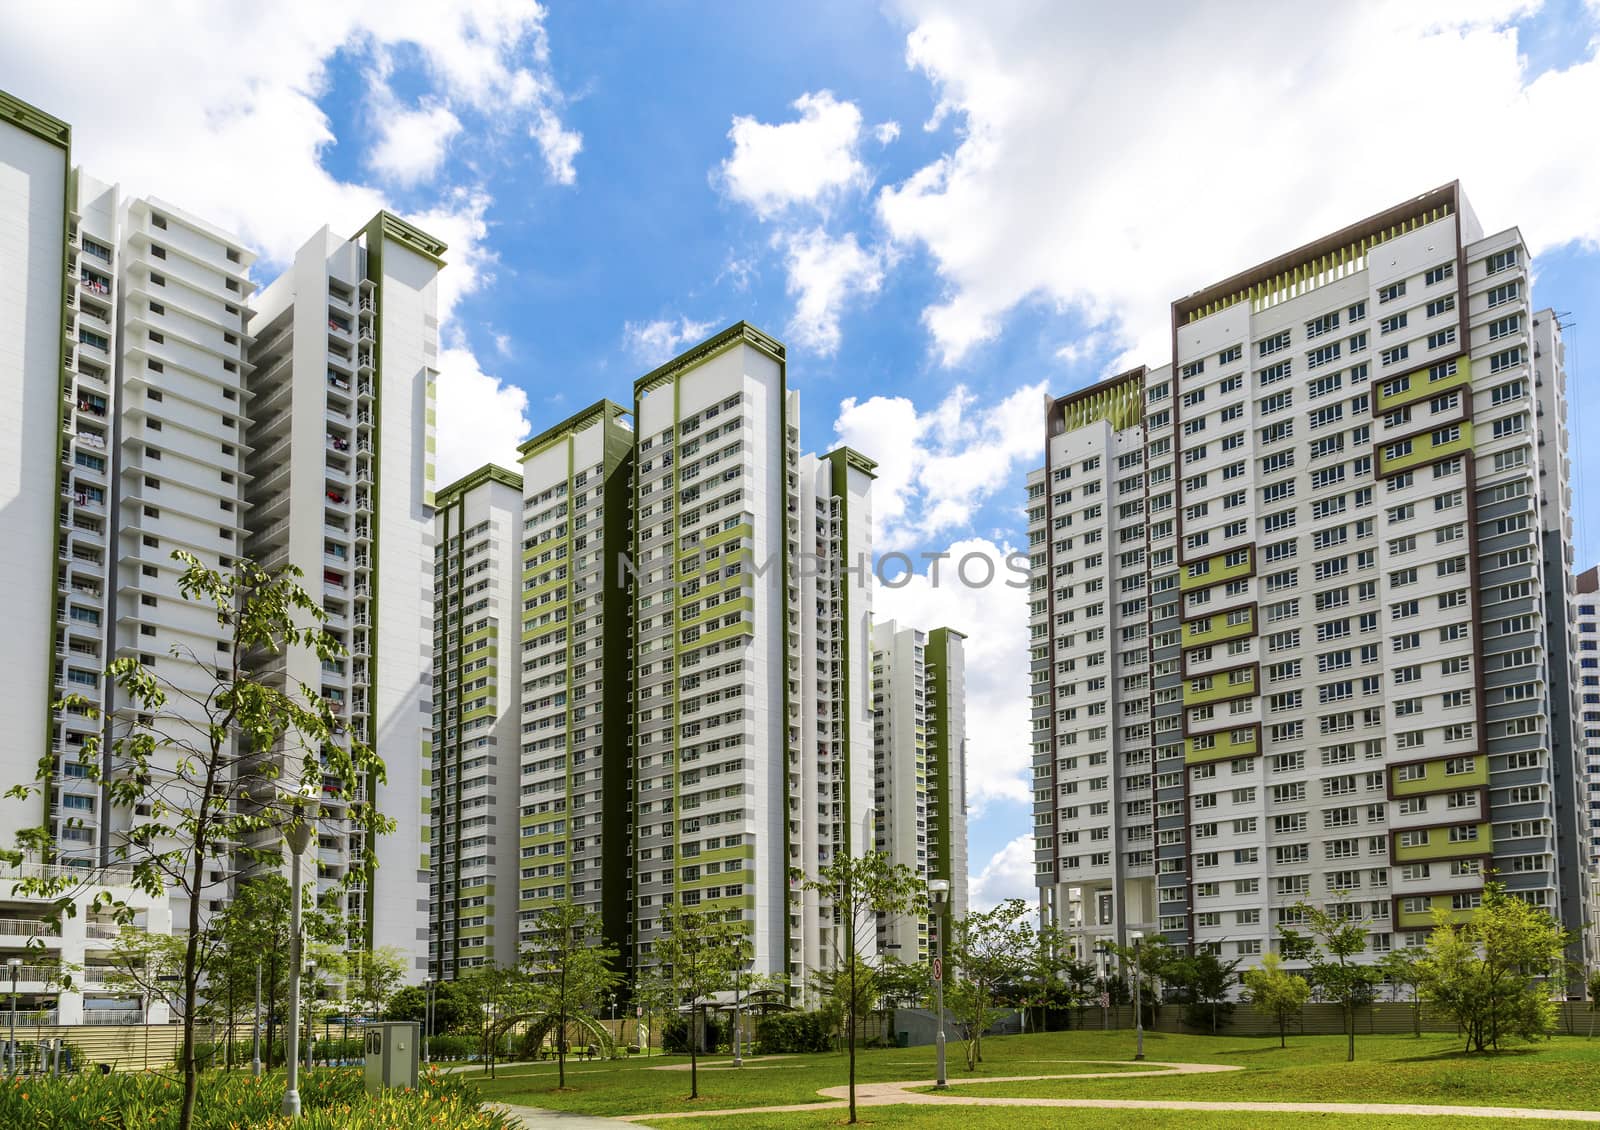 A horizontal shot of a park leading to a green estate in Singapore.